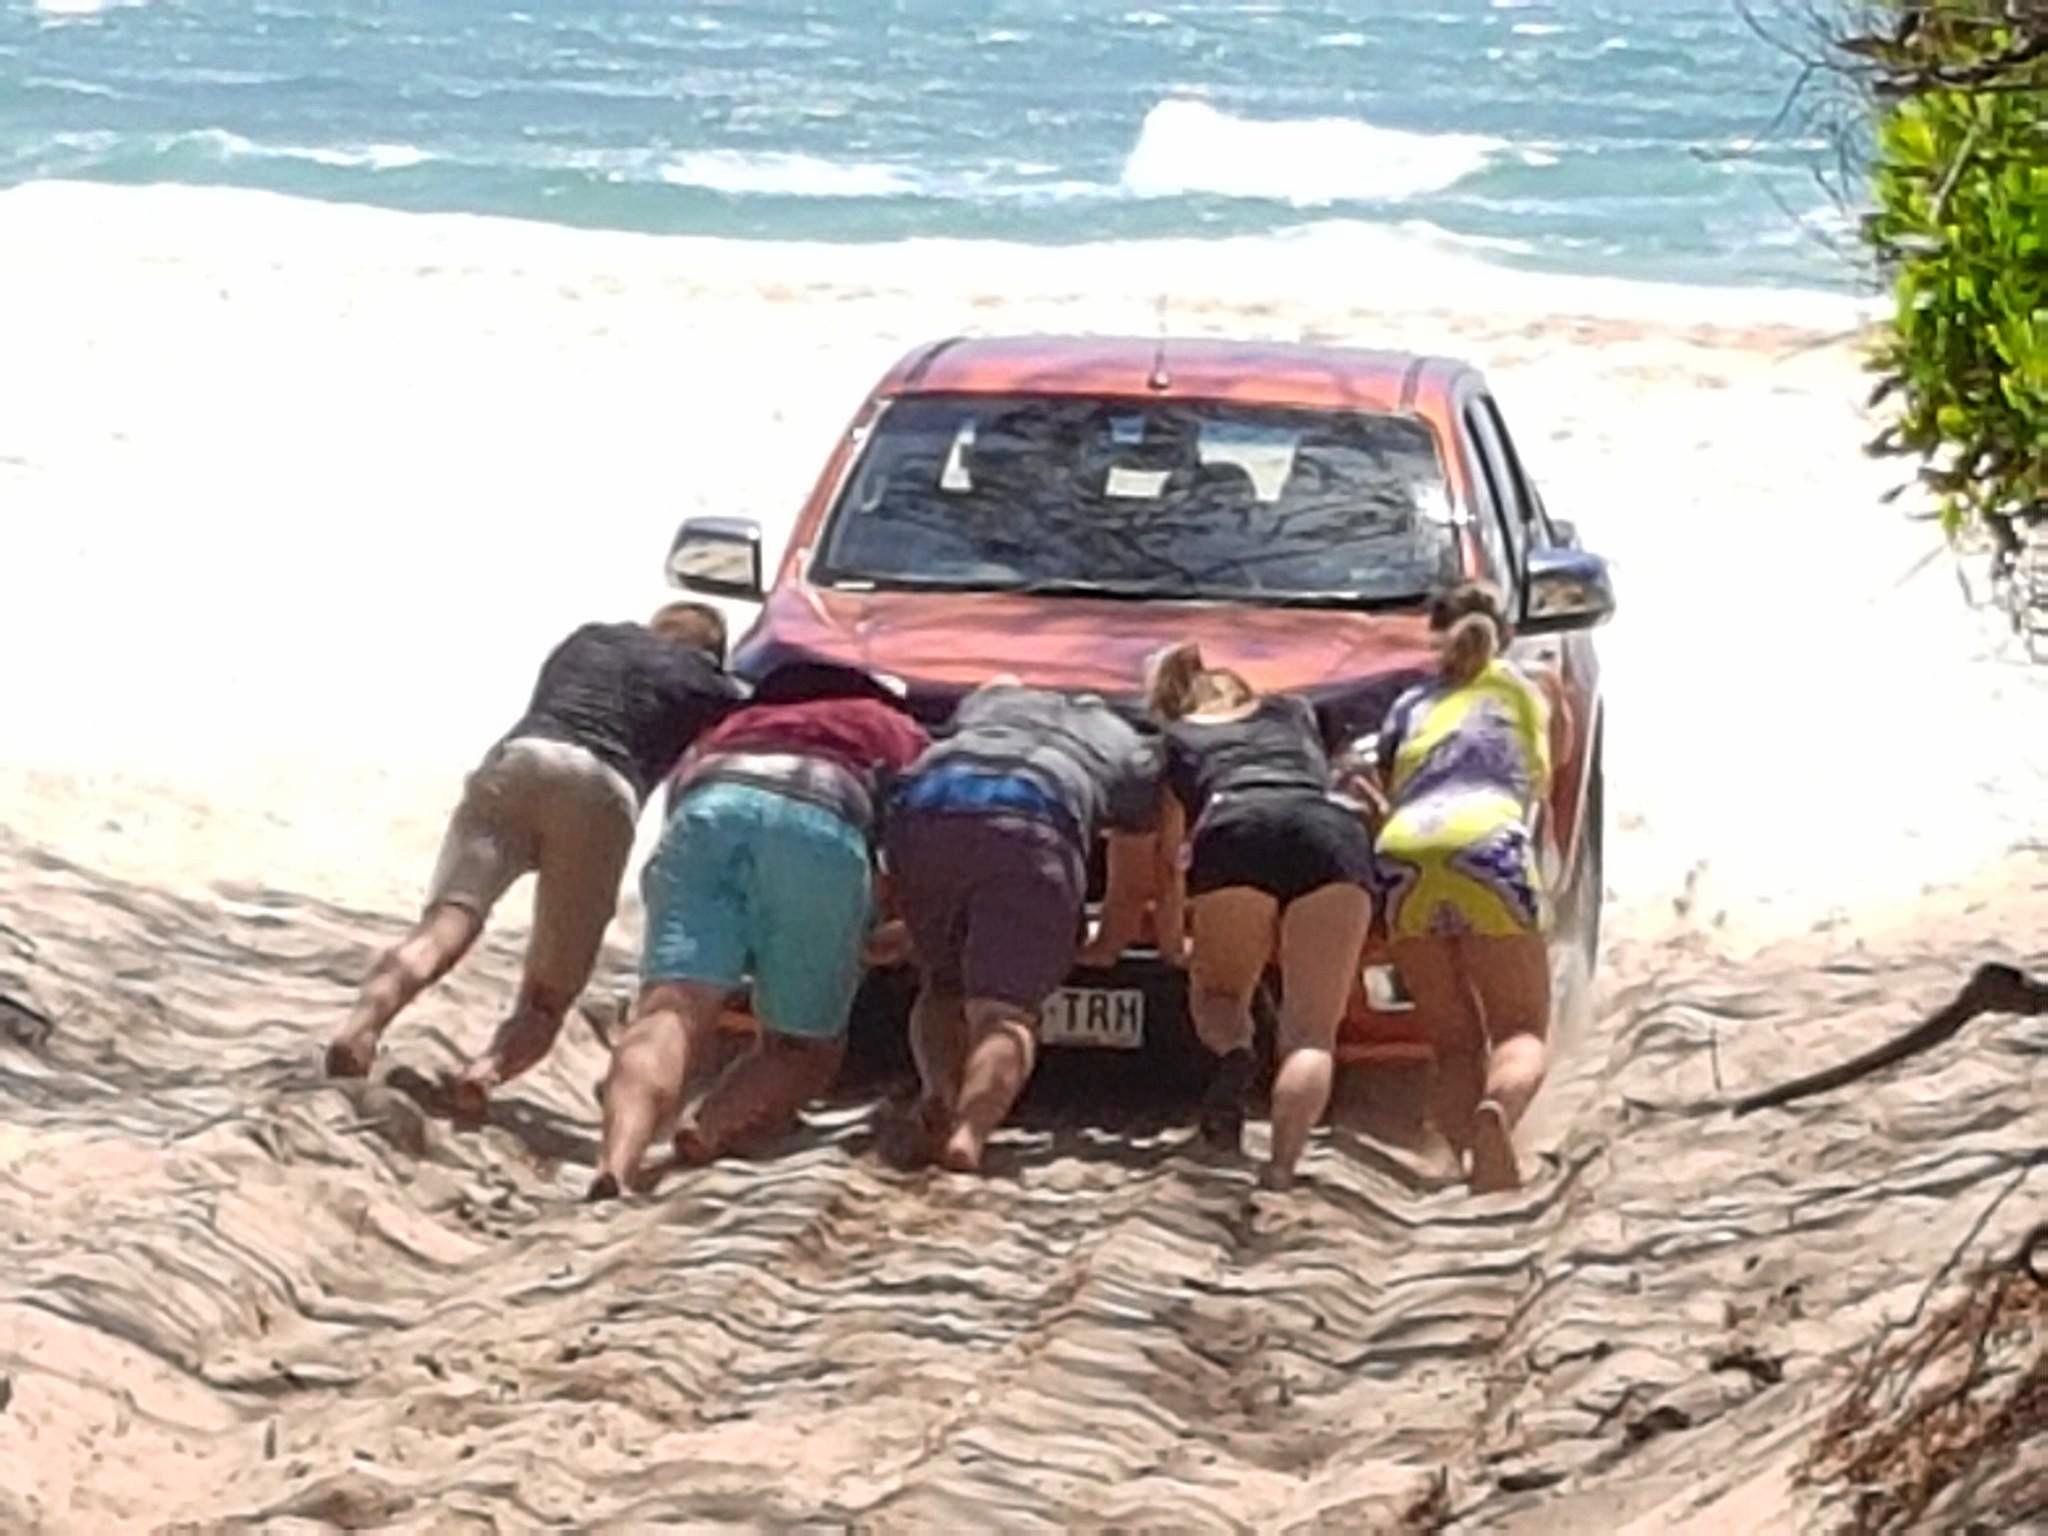 OFF THE ROAD: Some of the incidents documented on the Facebook page I got bogged at Inskip Point.